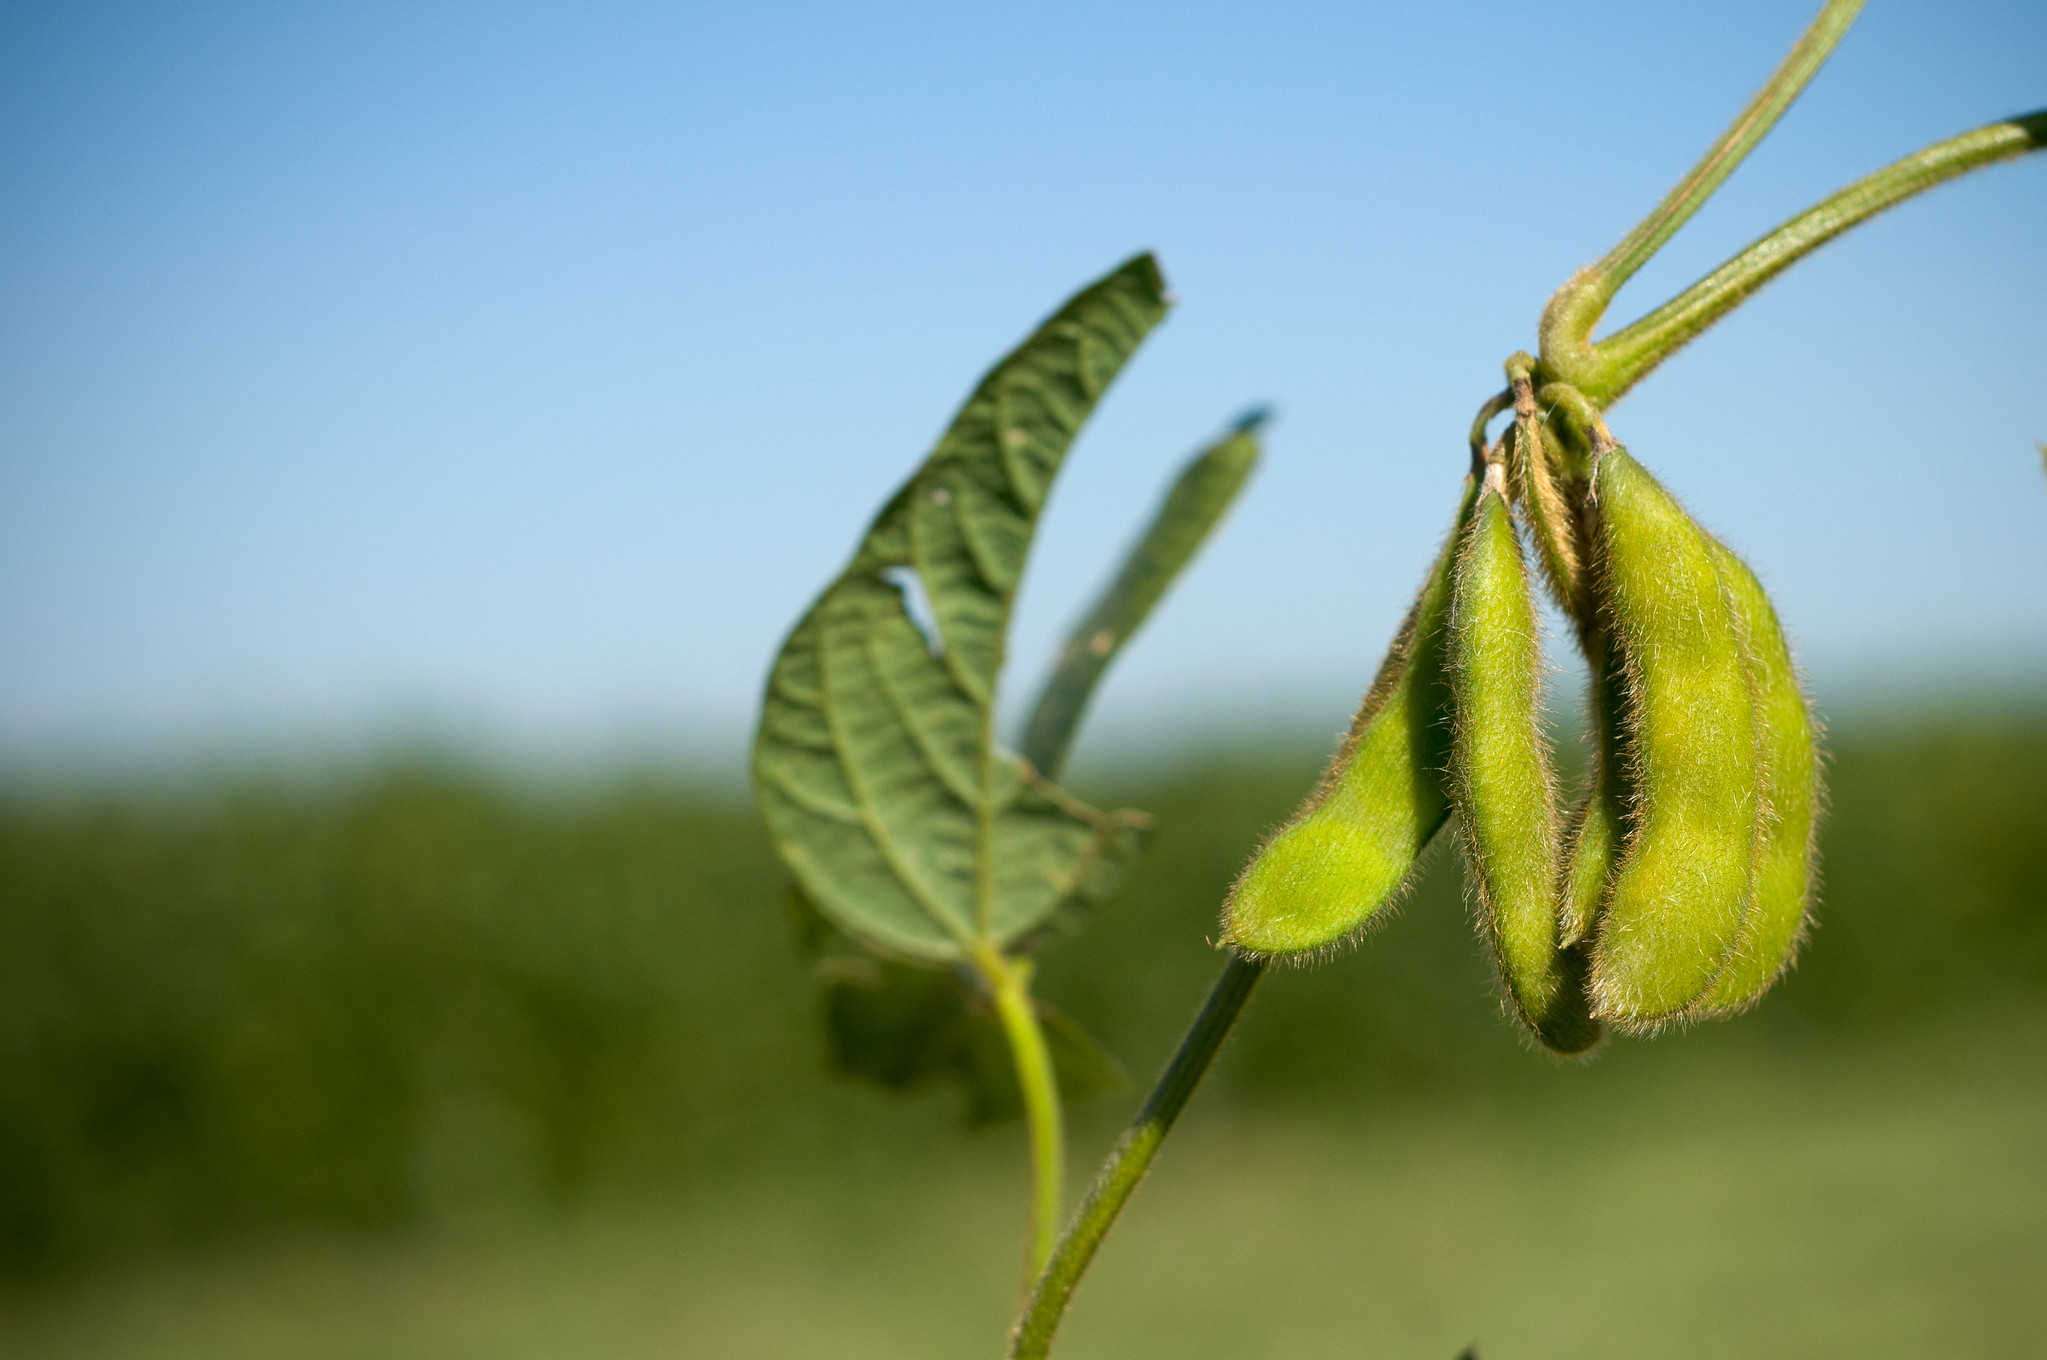 CAFNR Researchers Earn $500,000 Grant to Work on Heat Tolerance in Soybeans (click to read)